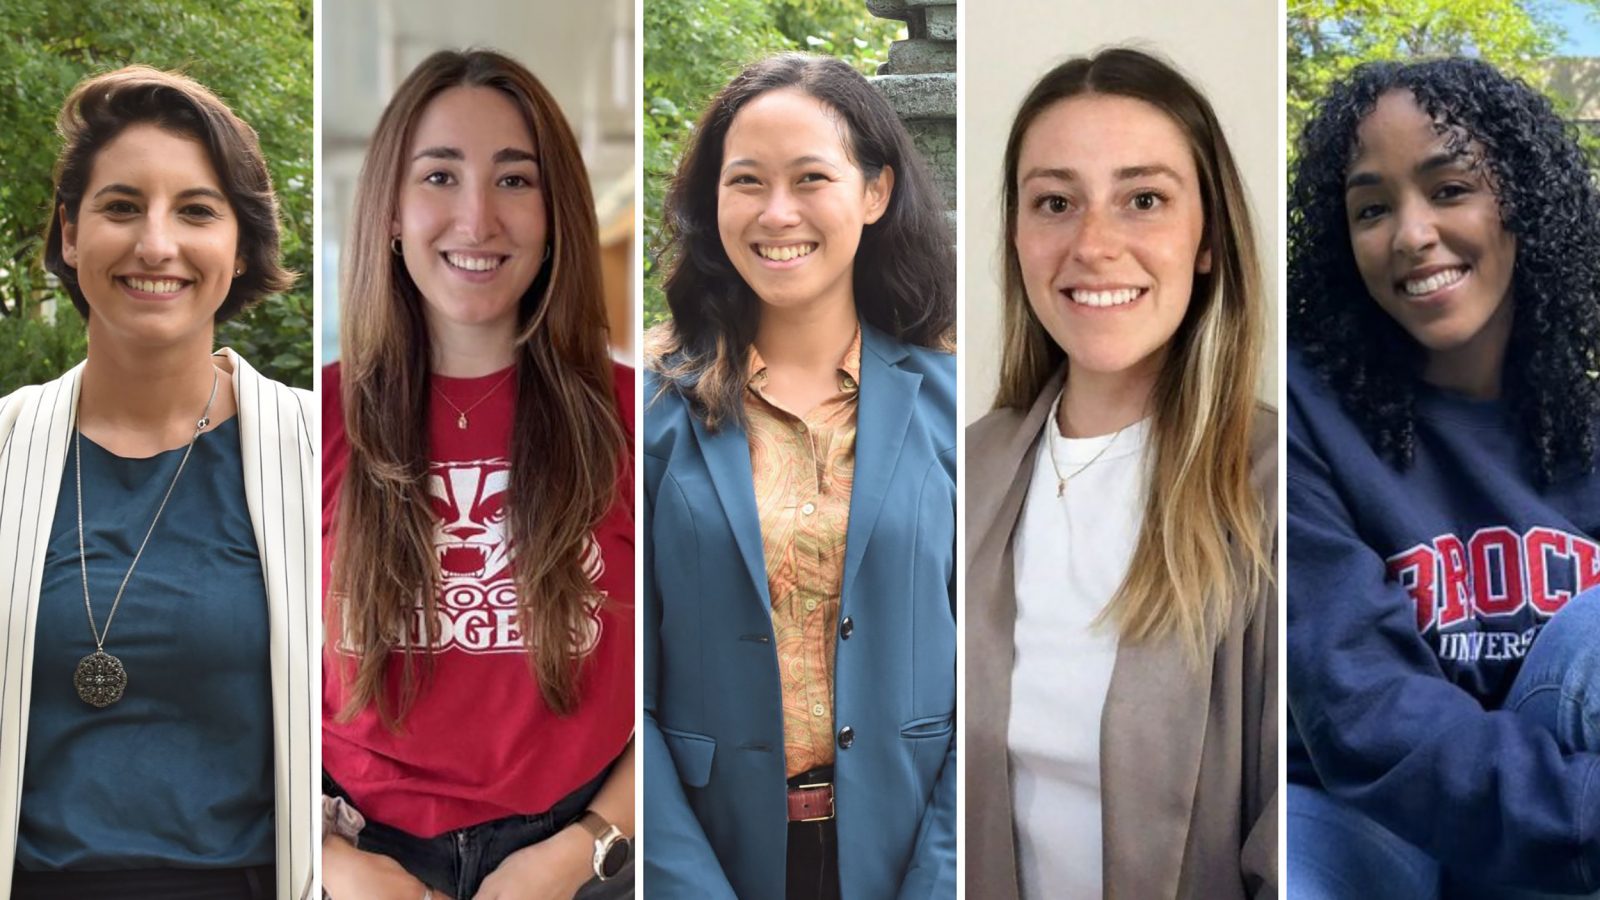 A photo collage of five vertical panels featuring the organizing committee of the 2023 Women in STEM event. Each panel has one of the members on alternating backgrounds of green foliage and white walls. They are dressed in a selection of business casual attire and brock university branded shirts.